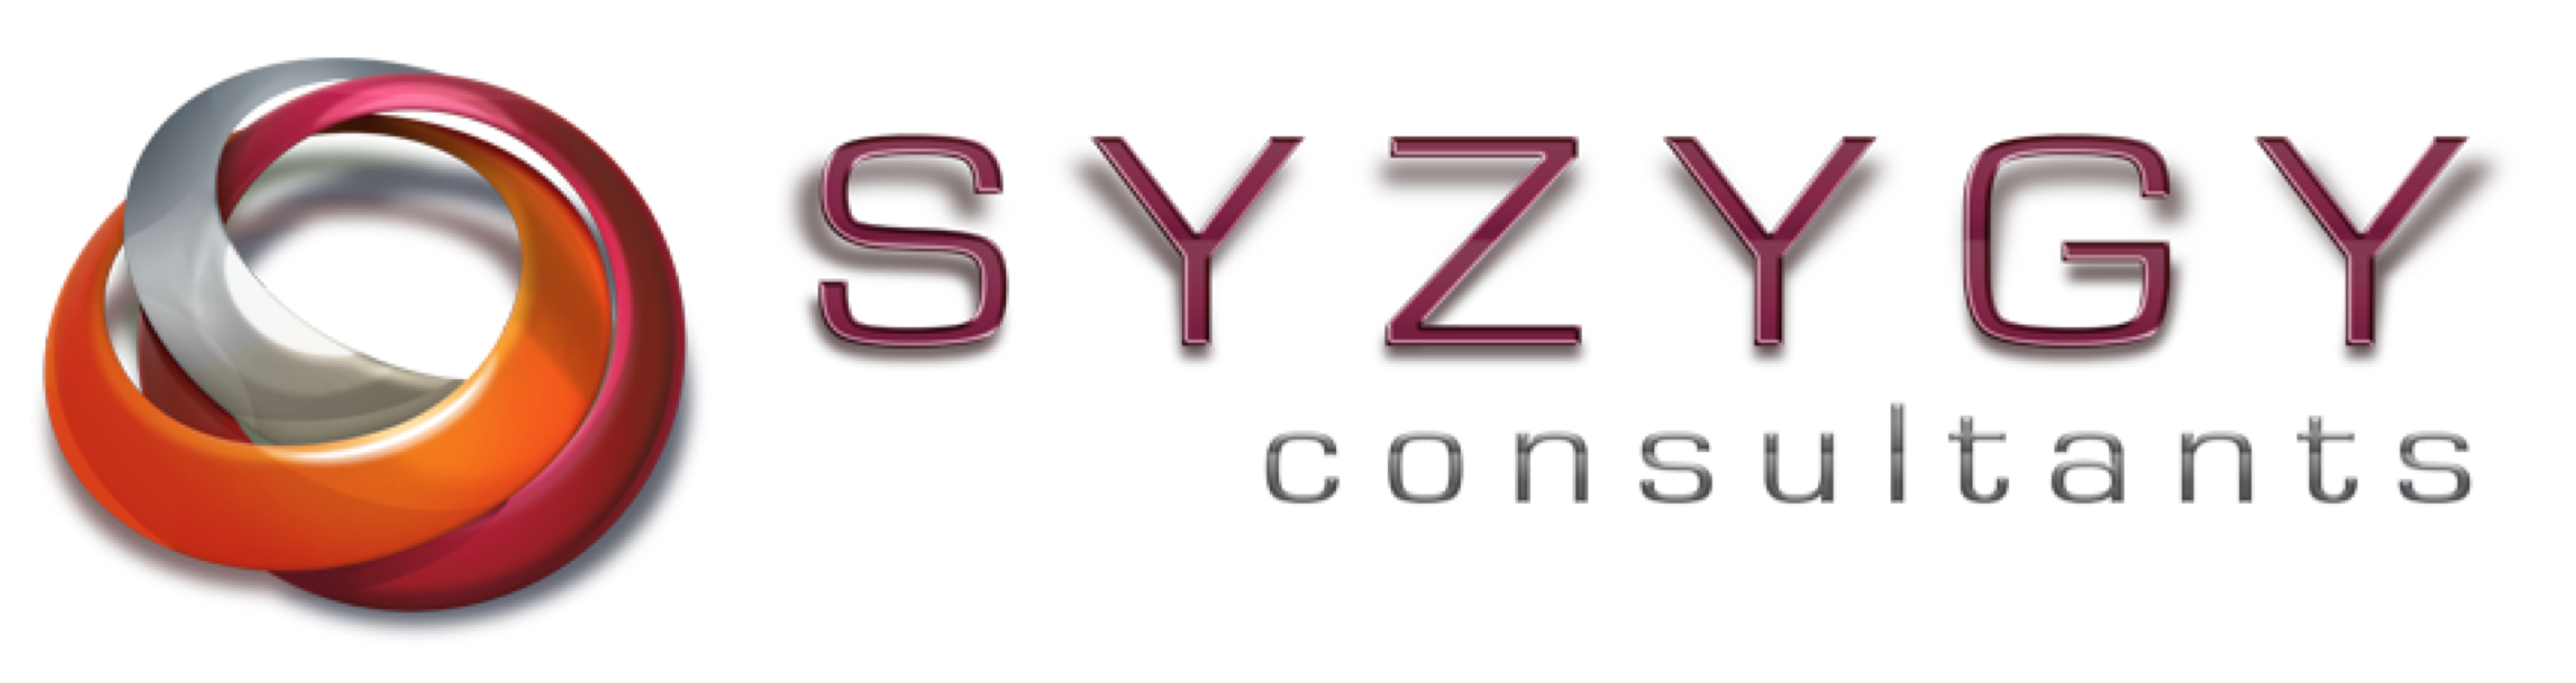 Syzygy Consultants